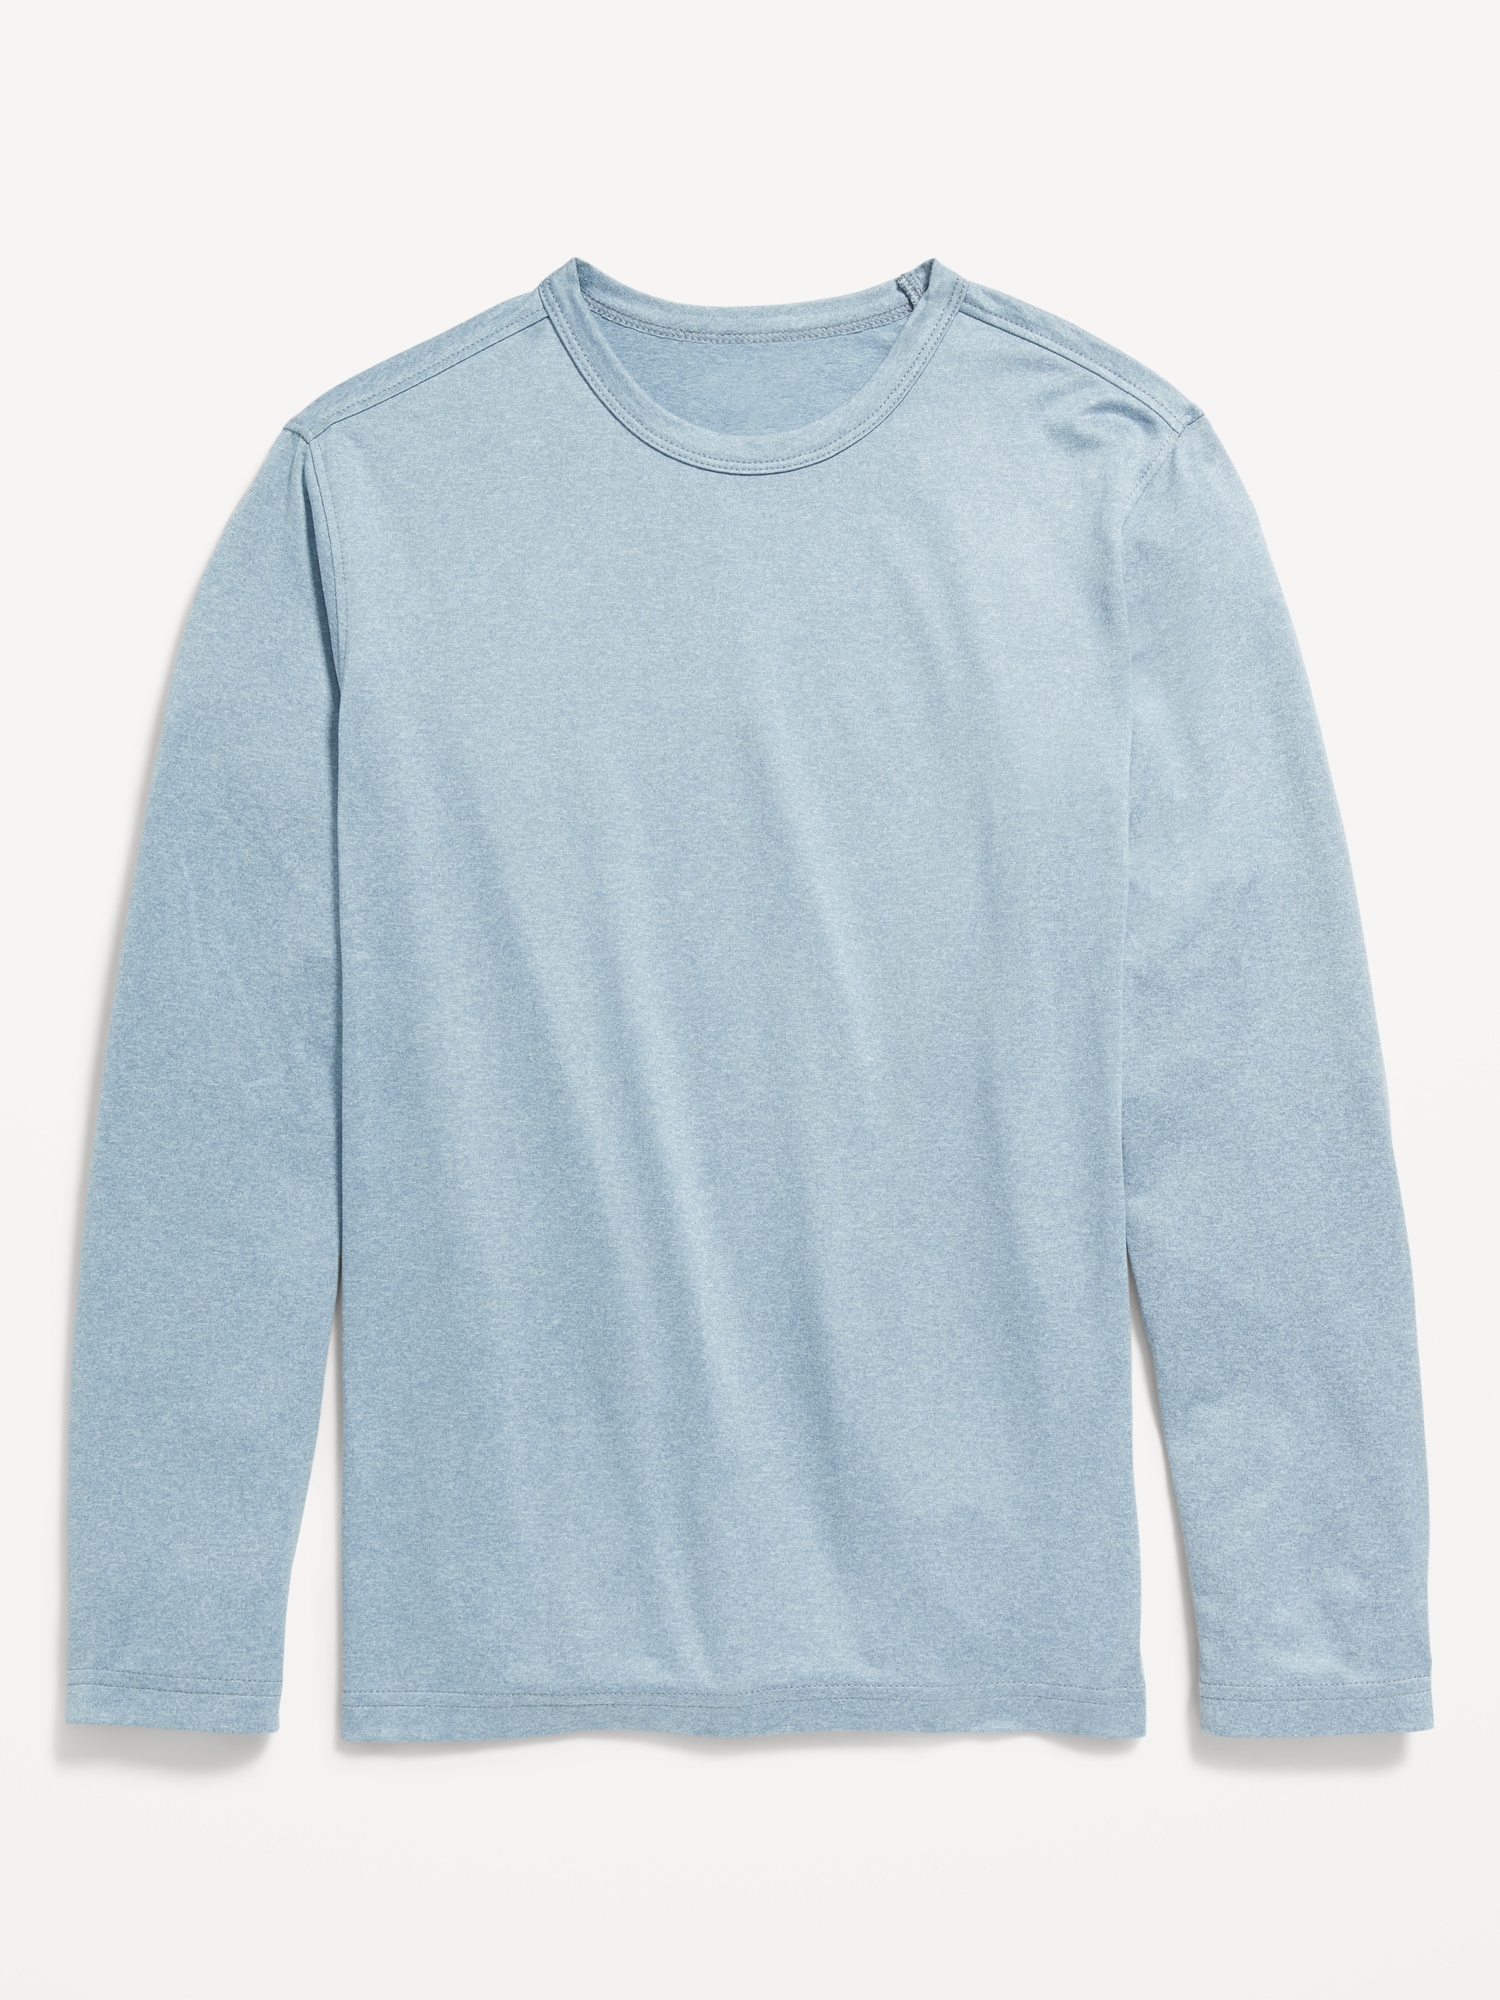 Cloud 94 Soft Long-Sleeve T-Shirt for Boys | Old Navy